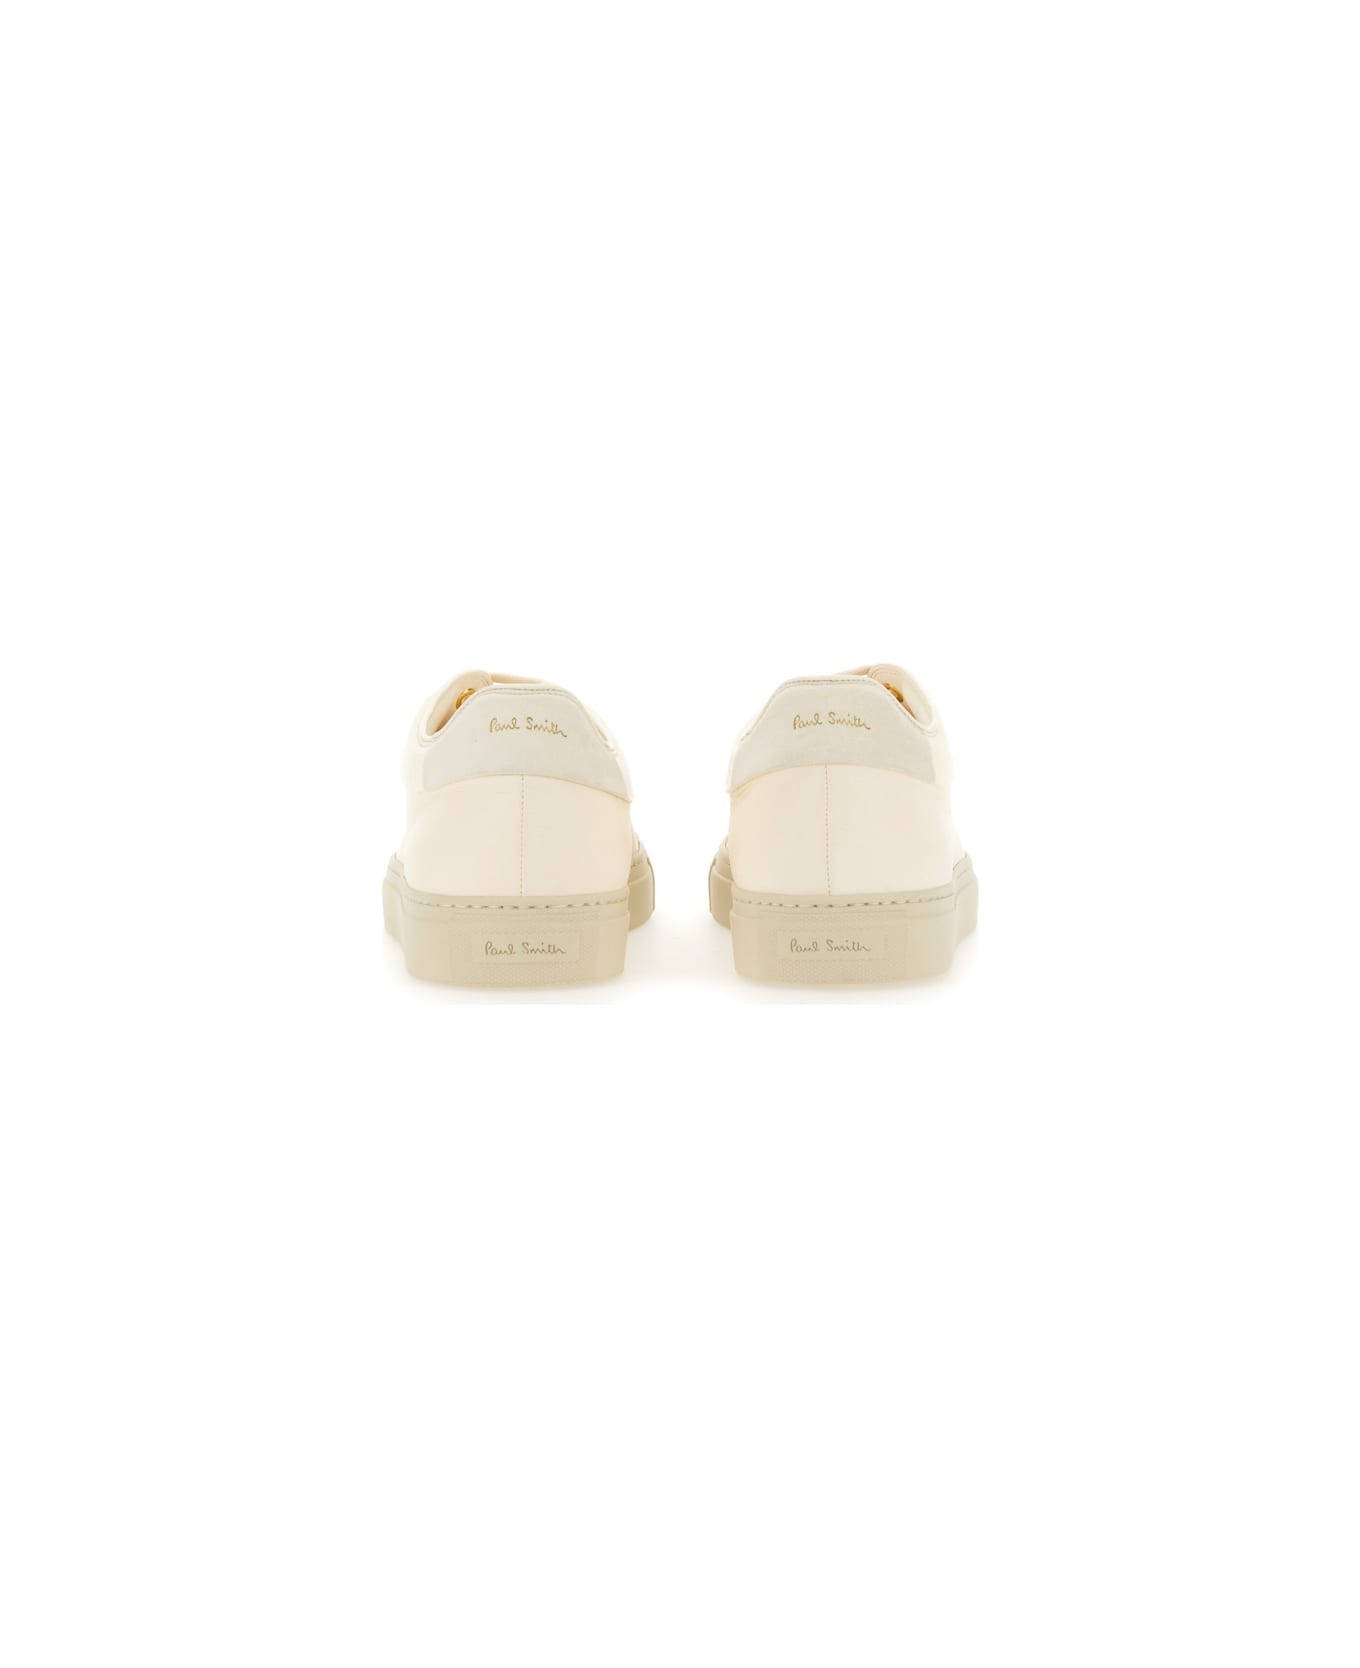 Paul Smith Leather Sneaker - IVORY